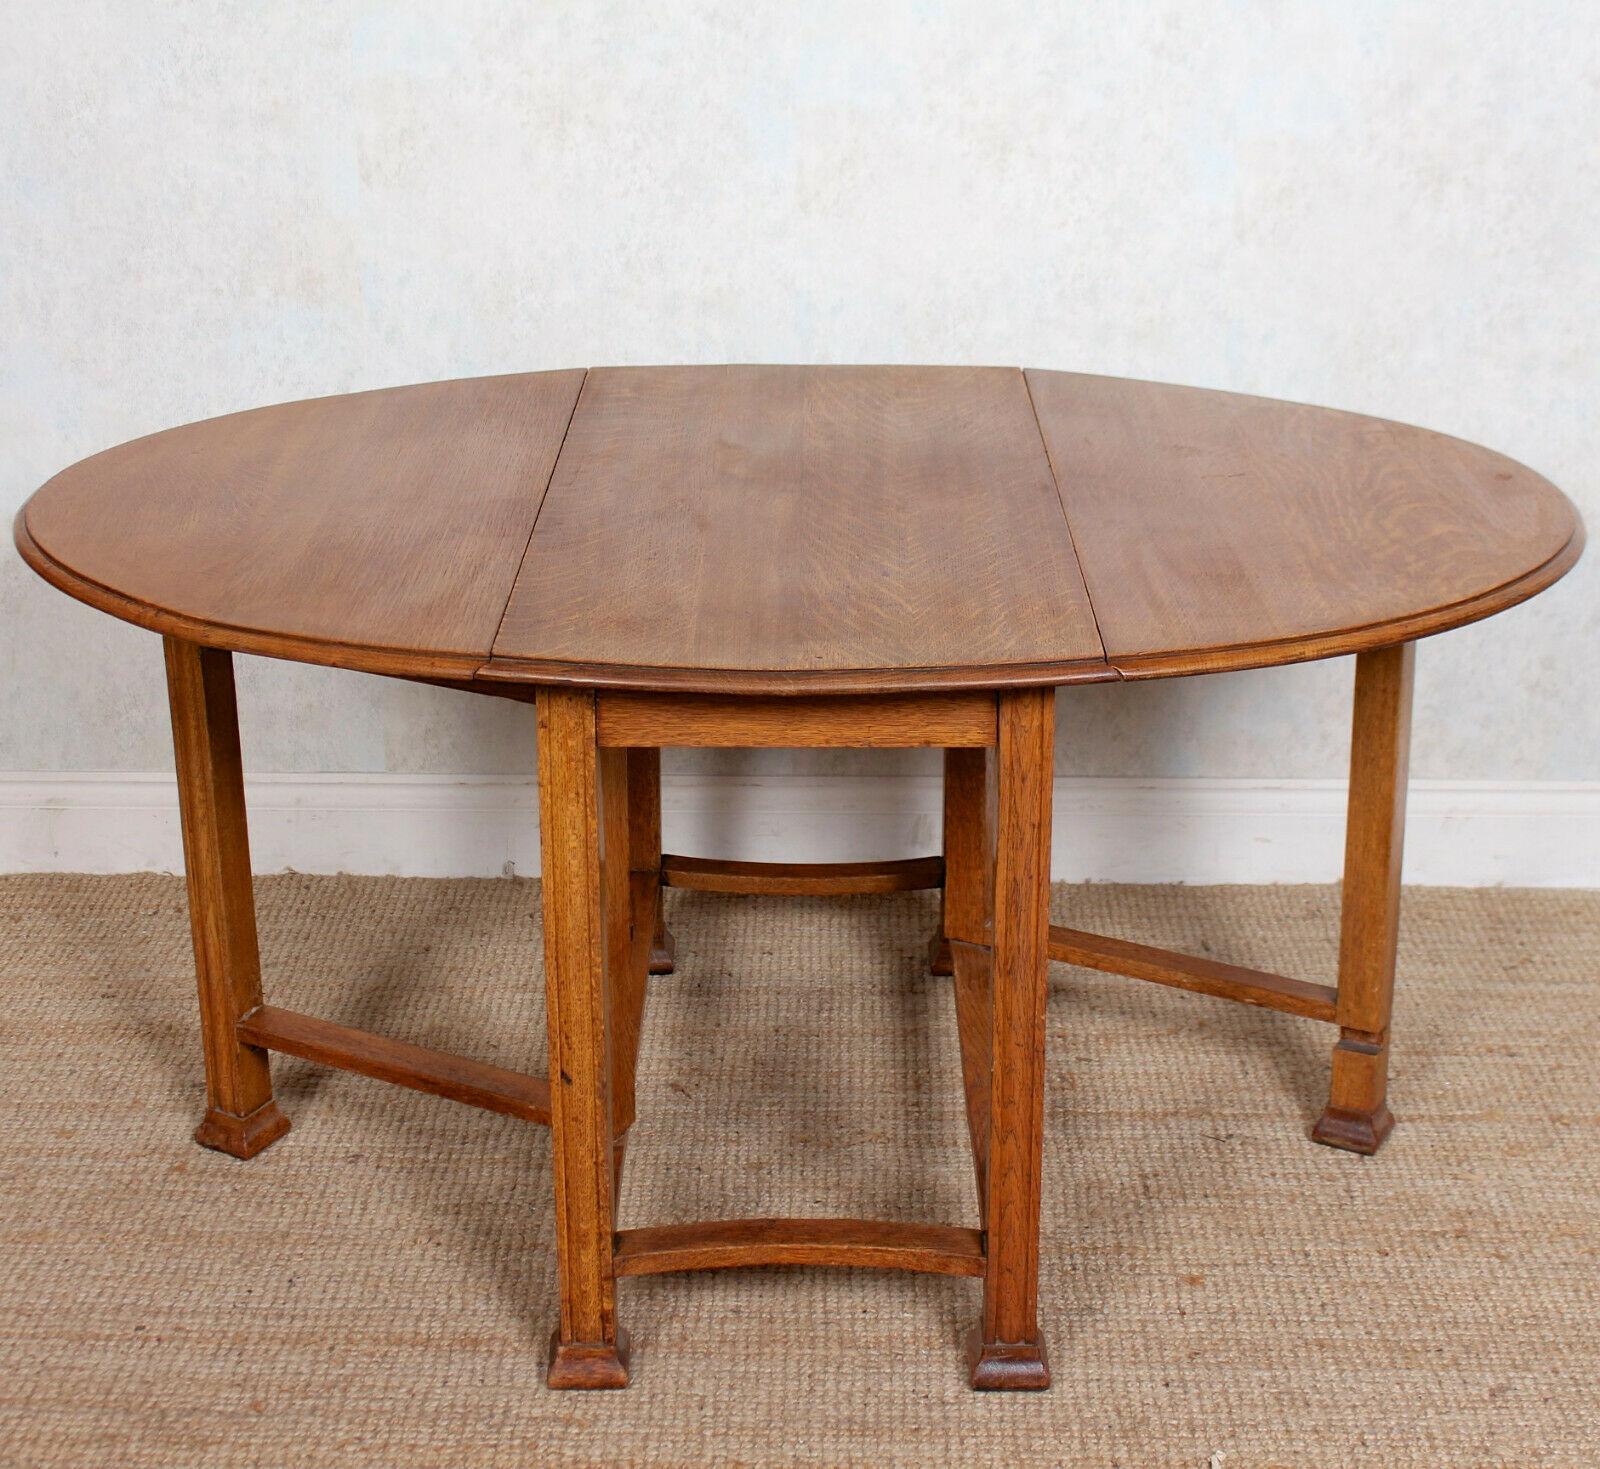 An attractive early 20th century oak gateleg table.
The oval planked top with chamfered edges, two drop leaves and raised on well carved chaneled legs and feet united by carved stretchers.
England, circa 1920.